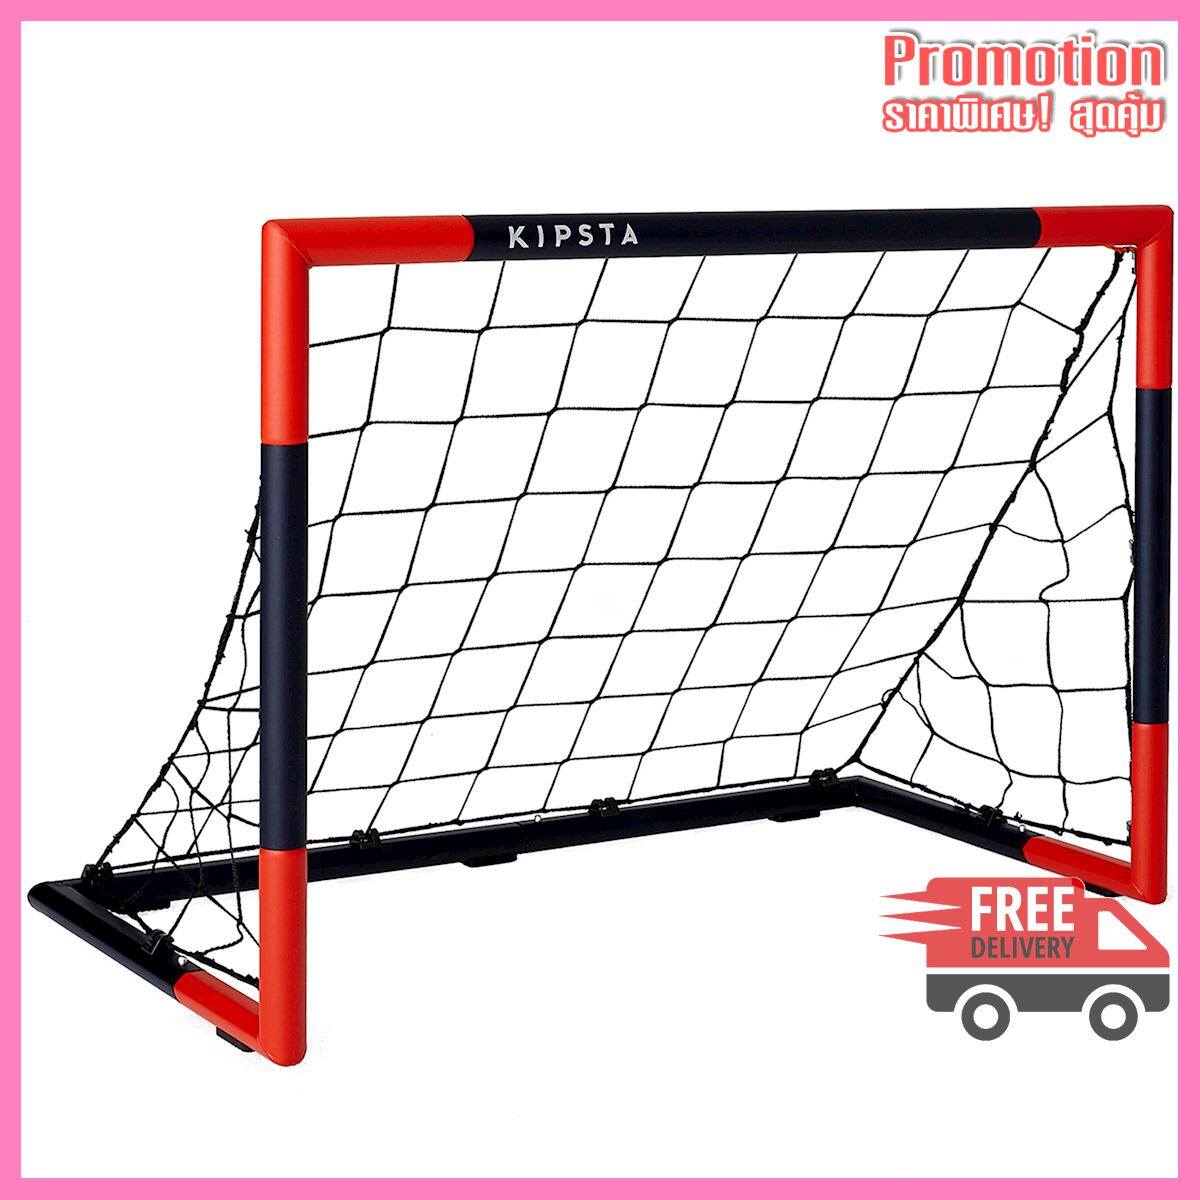 SG 500 Size 5 Football Goal - Navy/Vermilion Red